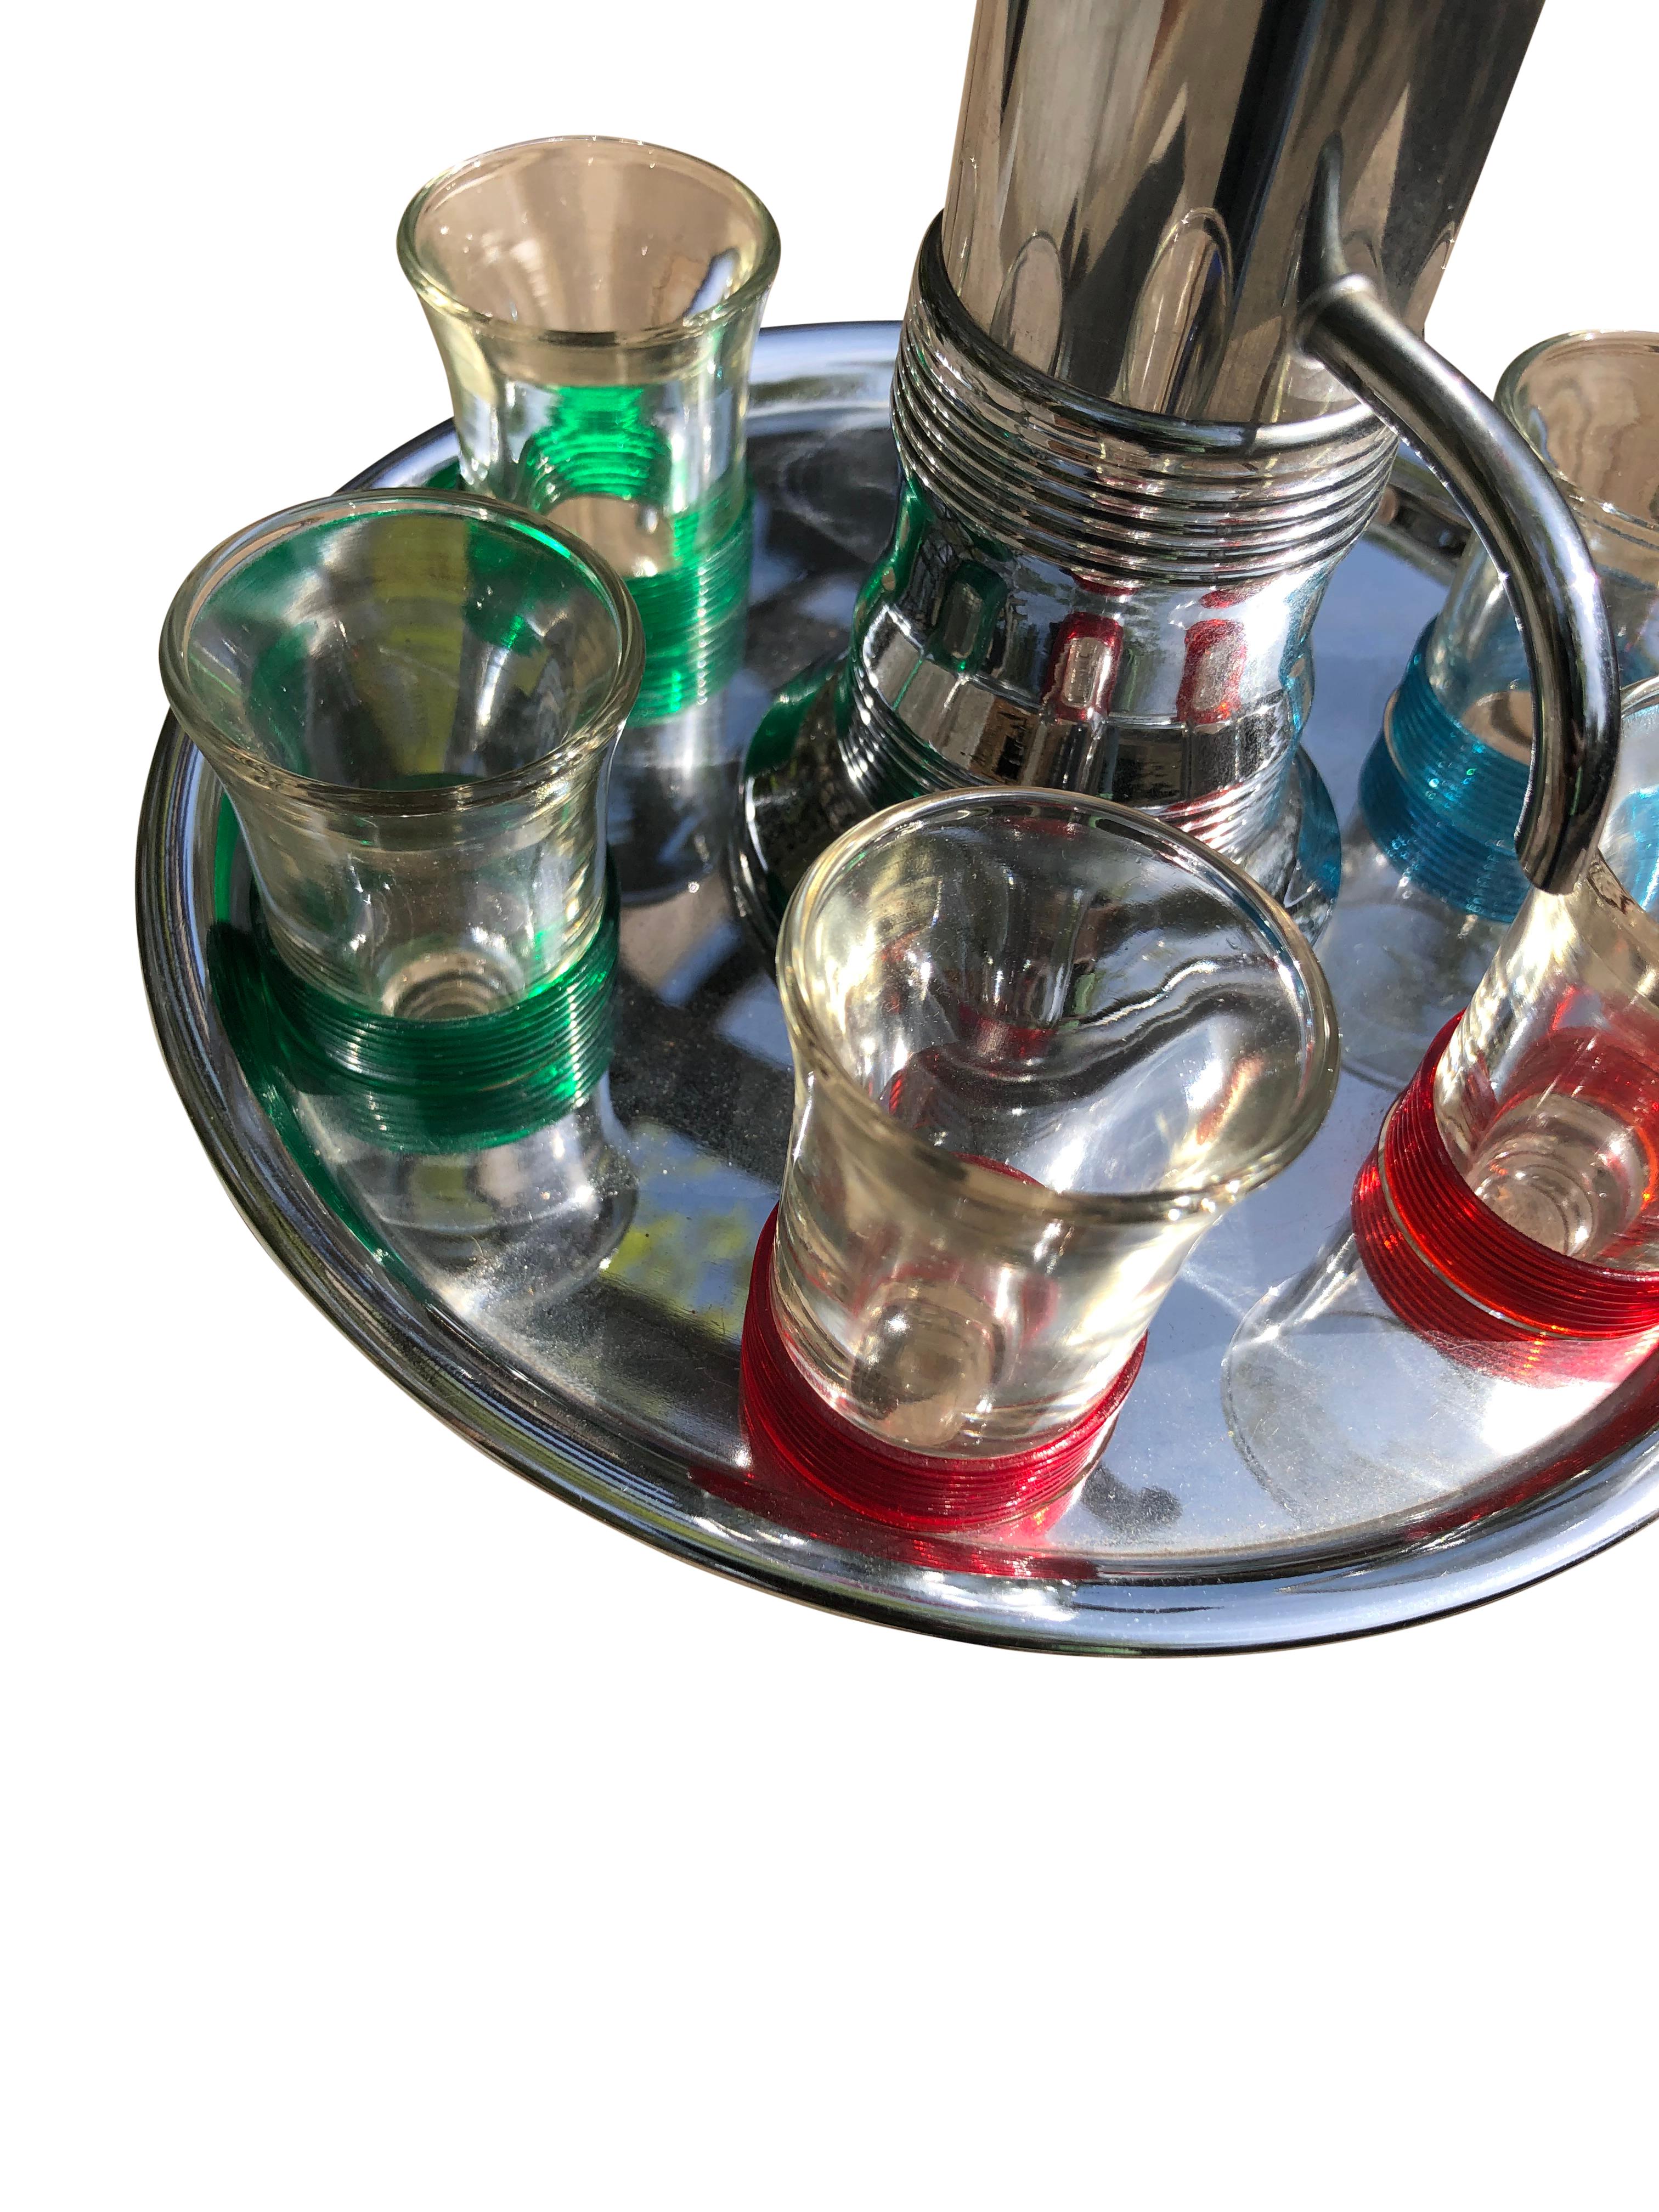 Vintage Mid-Century Carousel Liquor Dispenser with Set of 6 Shot Glasses sitting on a circular chrome plate with 6 cut-out slots to hold the shot glasses. Shot glasses are grouped in pairs with matching colored bands. There are two glasses with